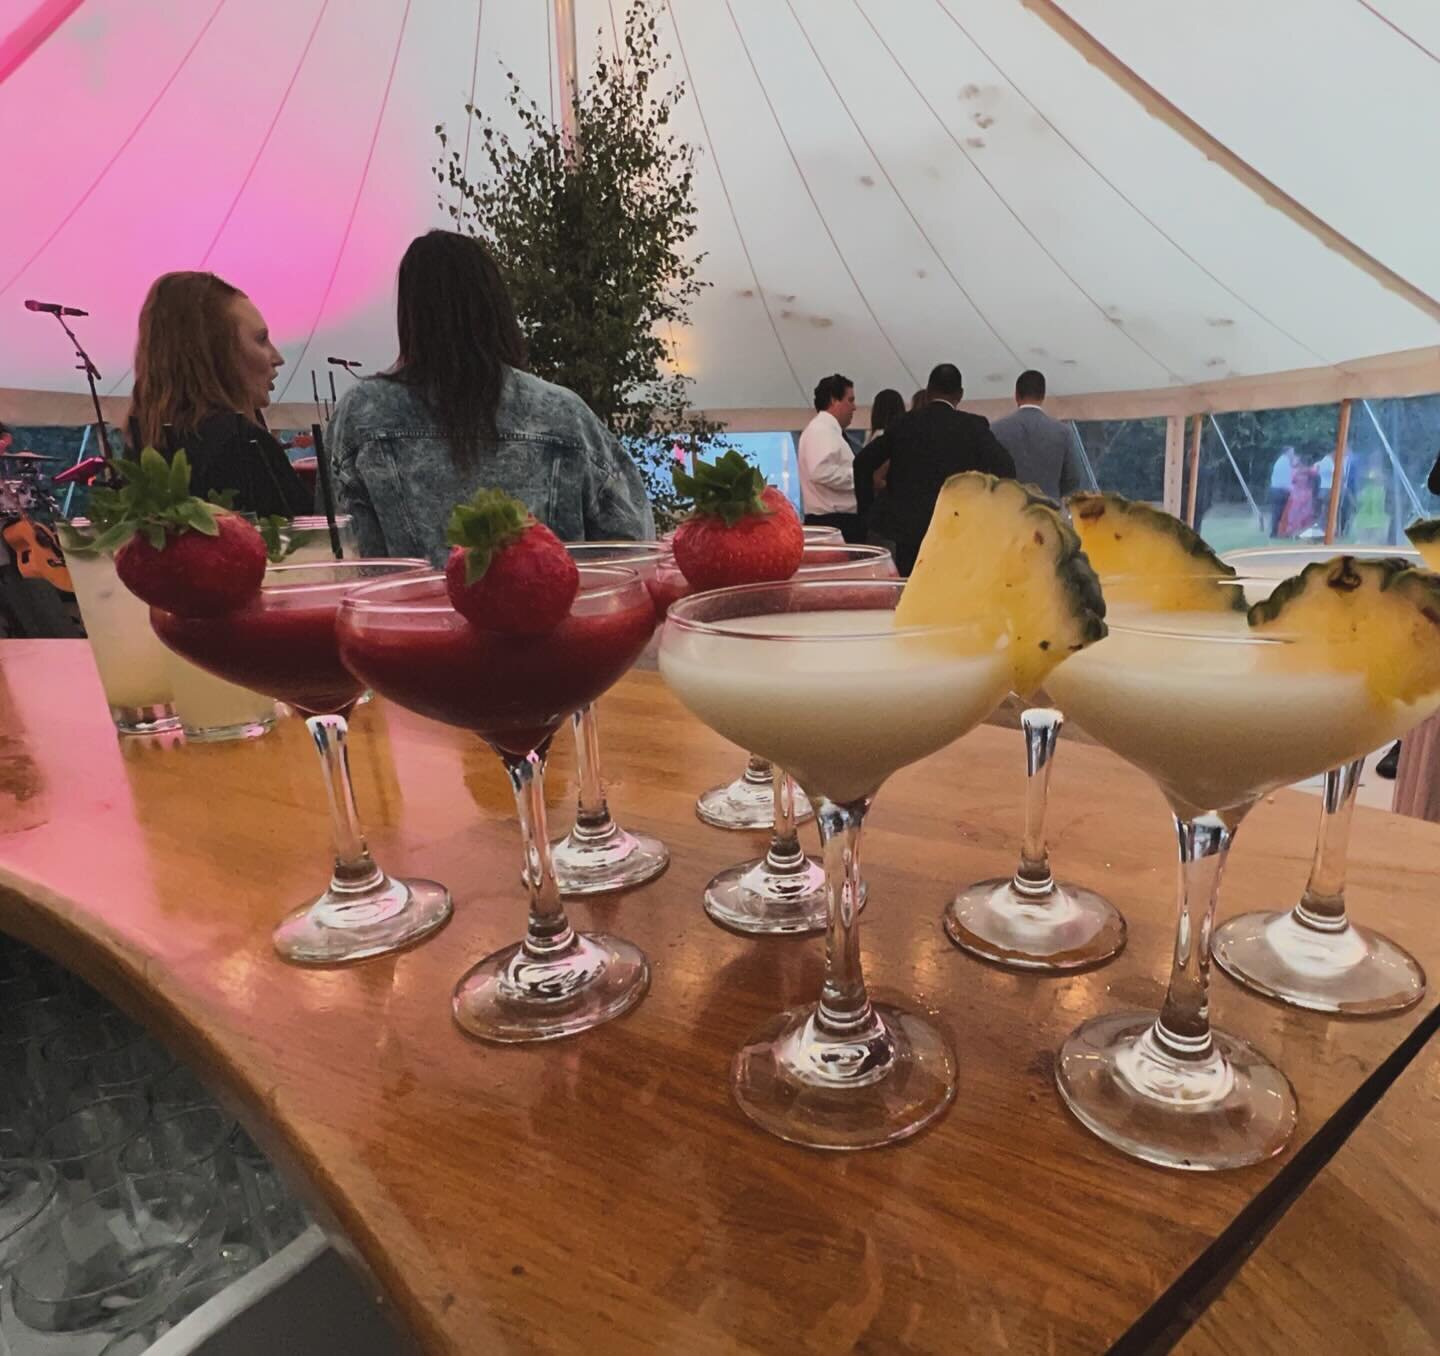 With spring and summer soon approaching we&rsquo;re taking lots of bookings every day! If your planning  wedding or event this year get in touch asap to secure your bar with us today! 

#kentwedding #kent #kentweddings #kentmobilebar #mobilebartender